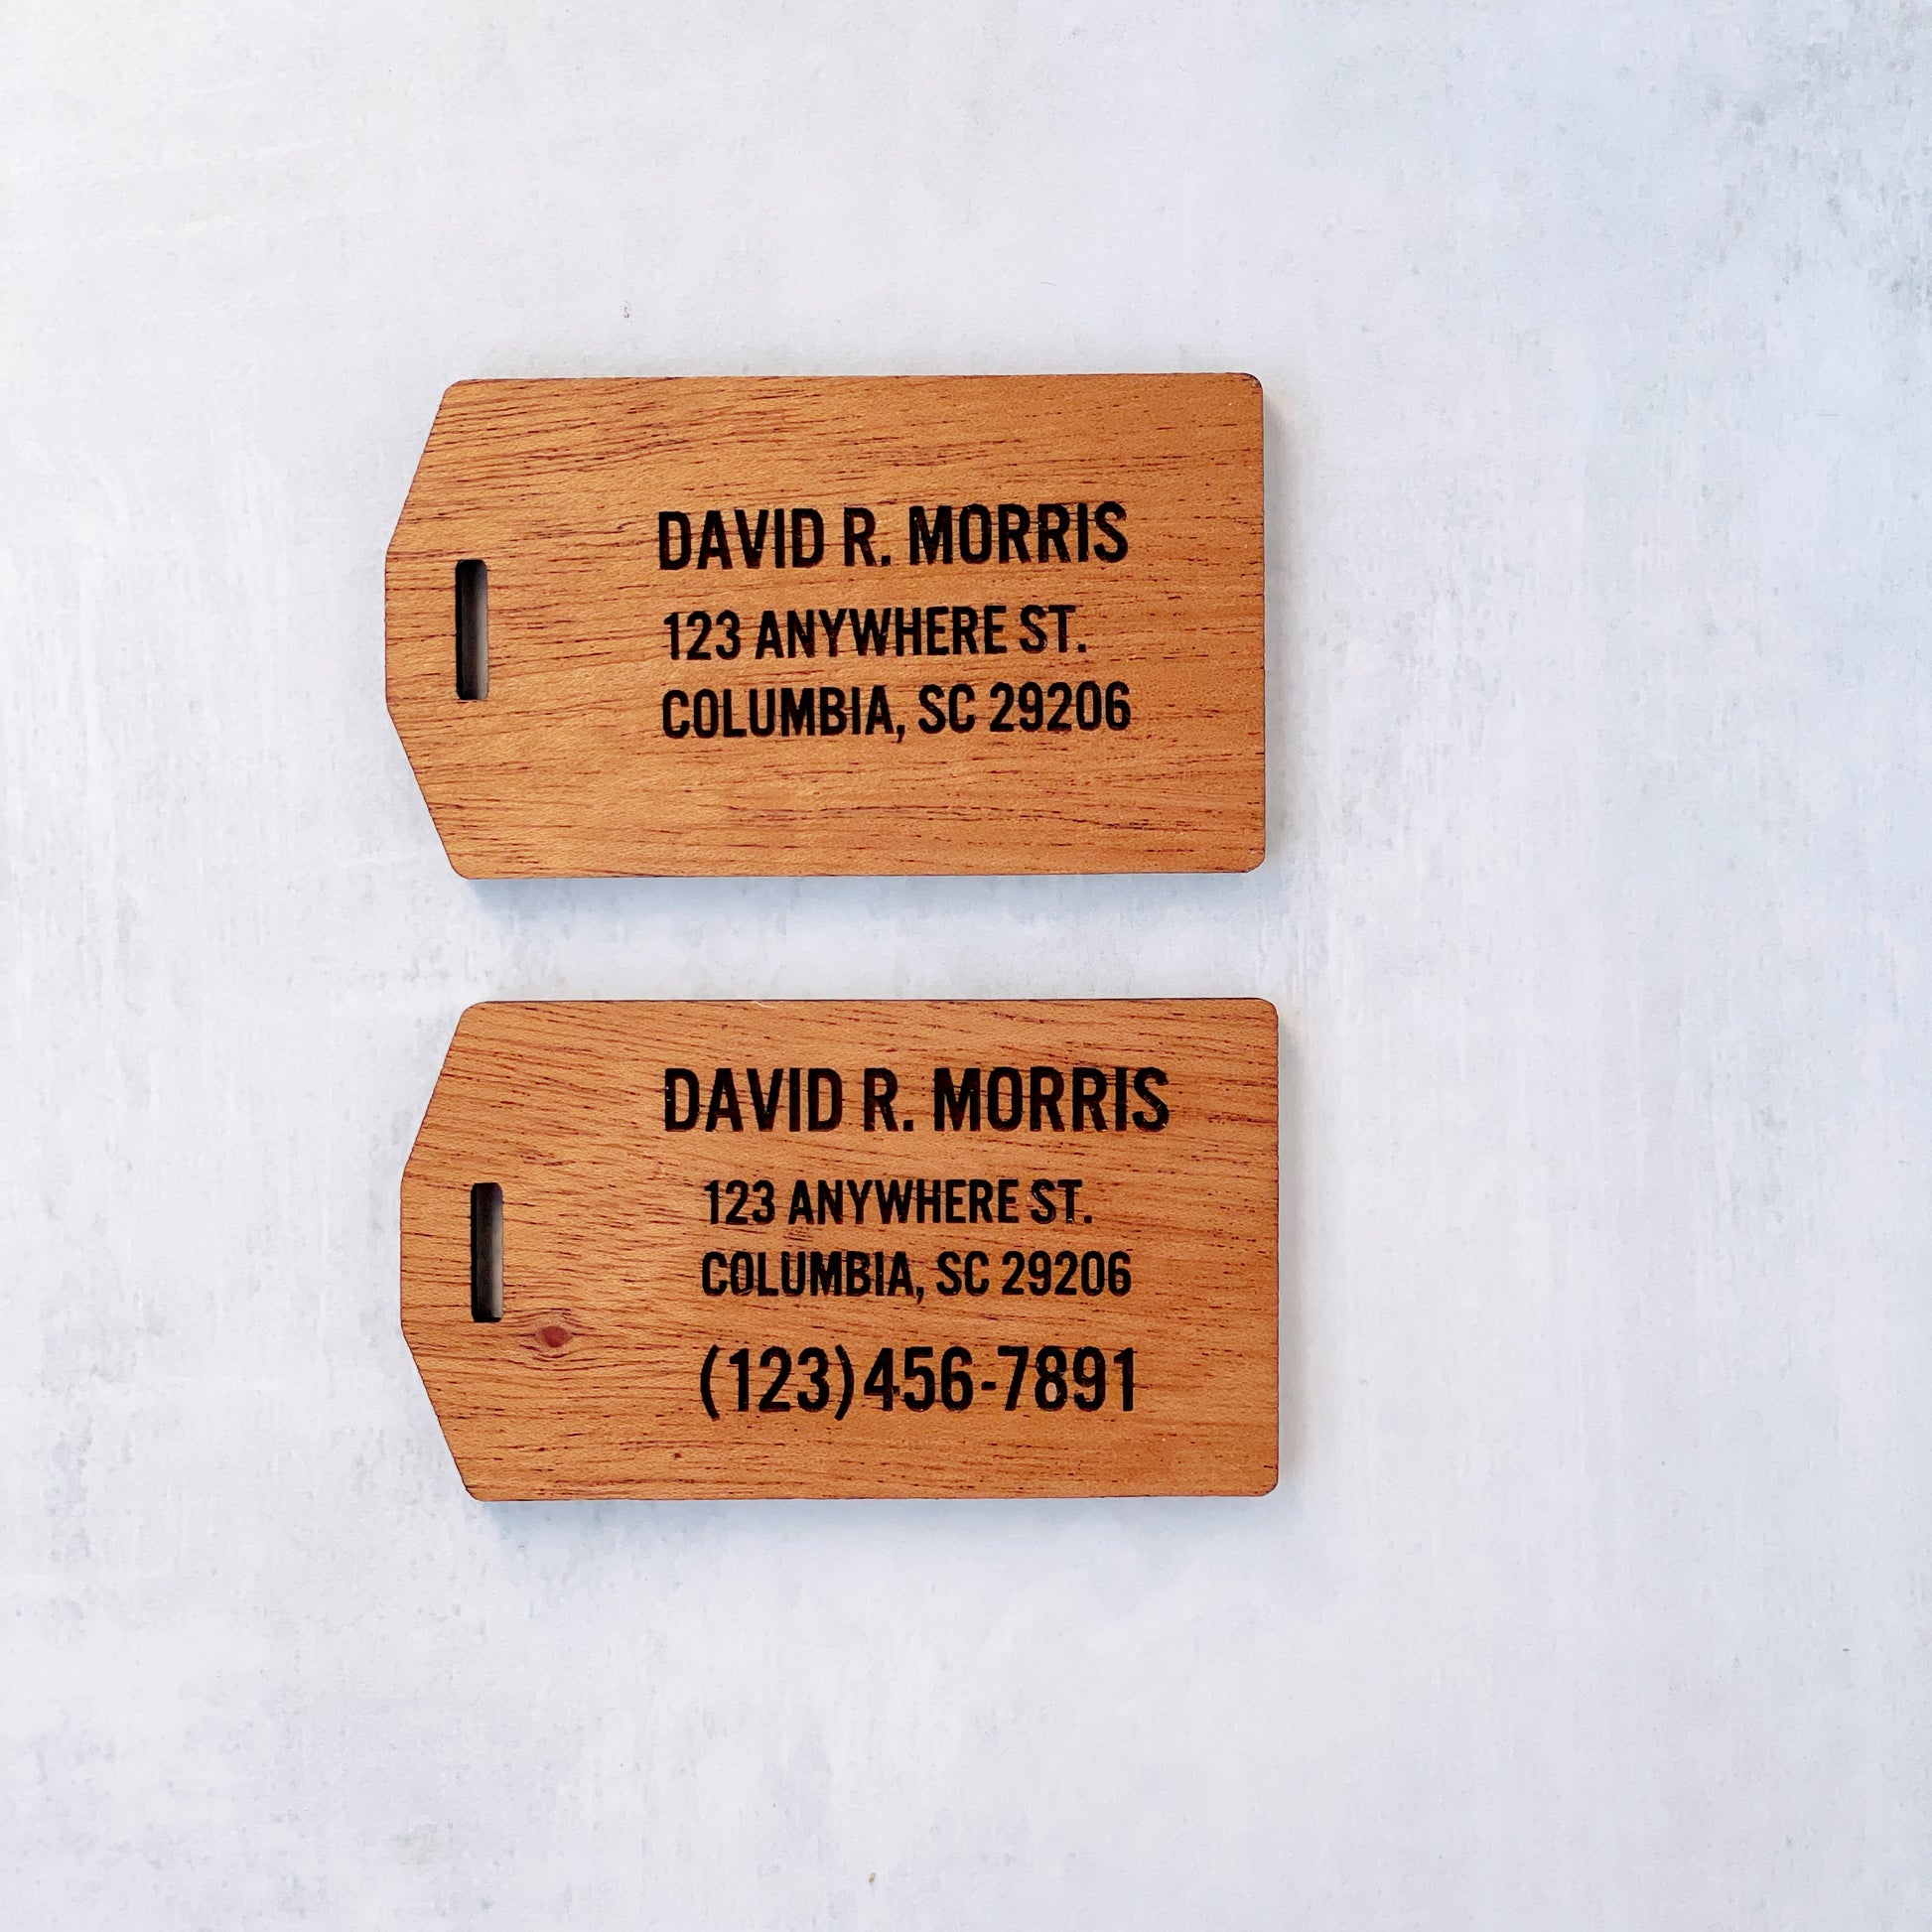 Engraving options for back of luggage tag